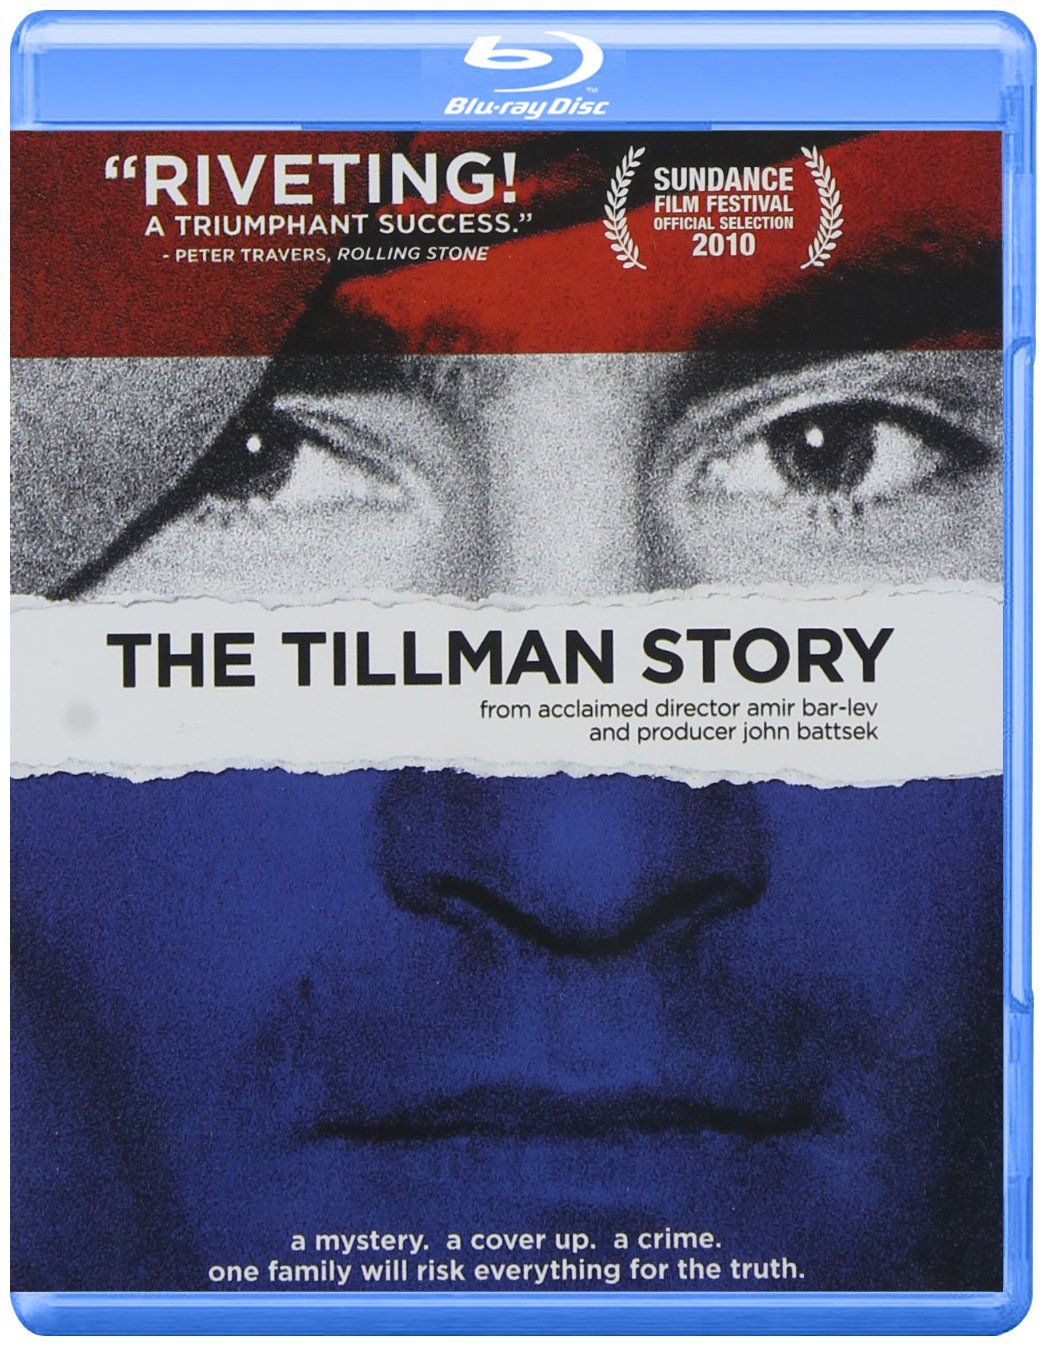 Movies based on the Afghanistan war - The Tillman Story